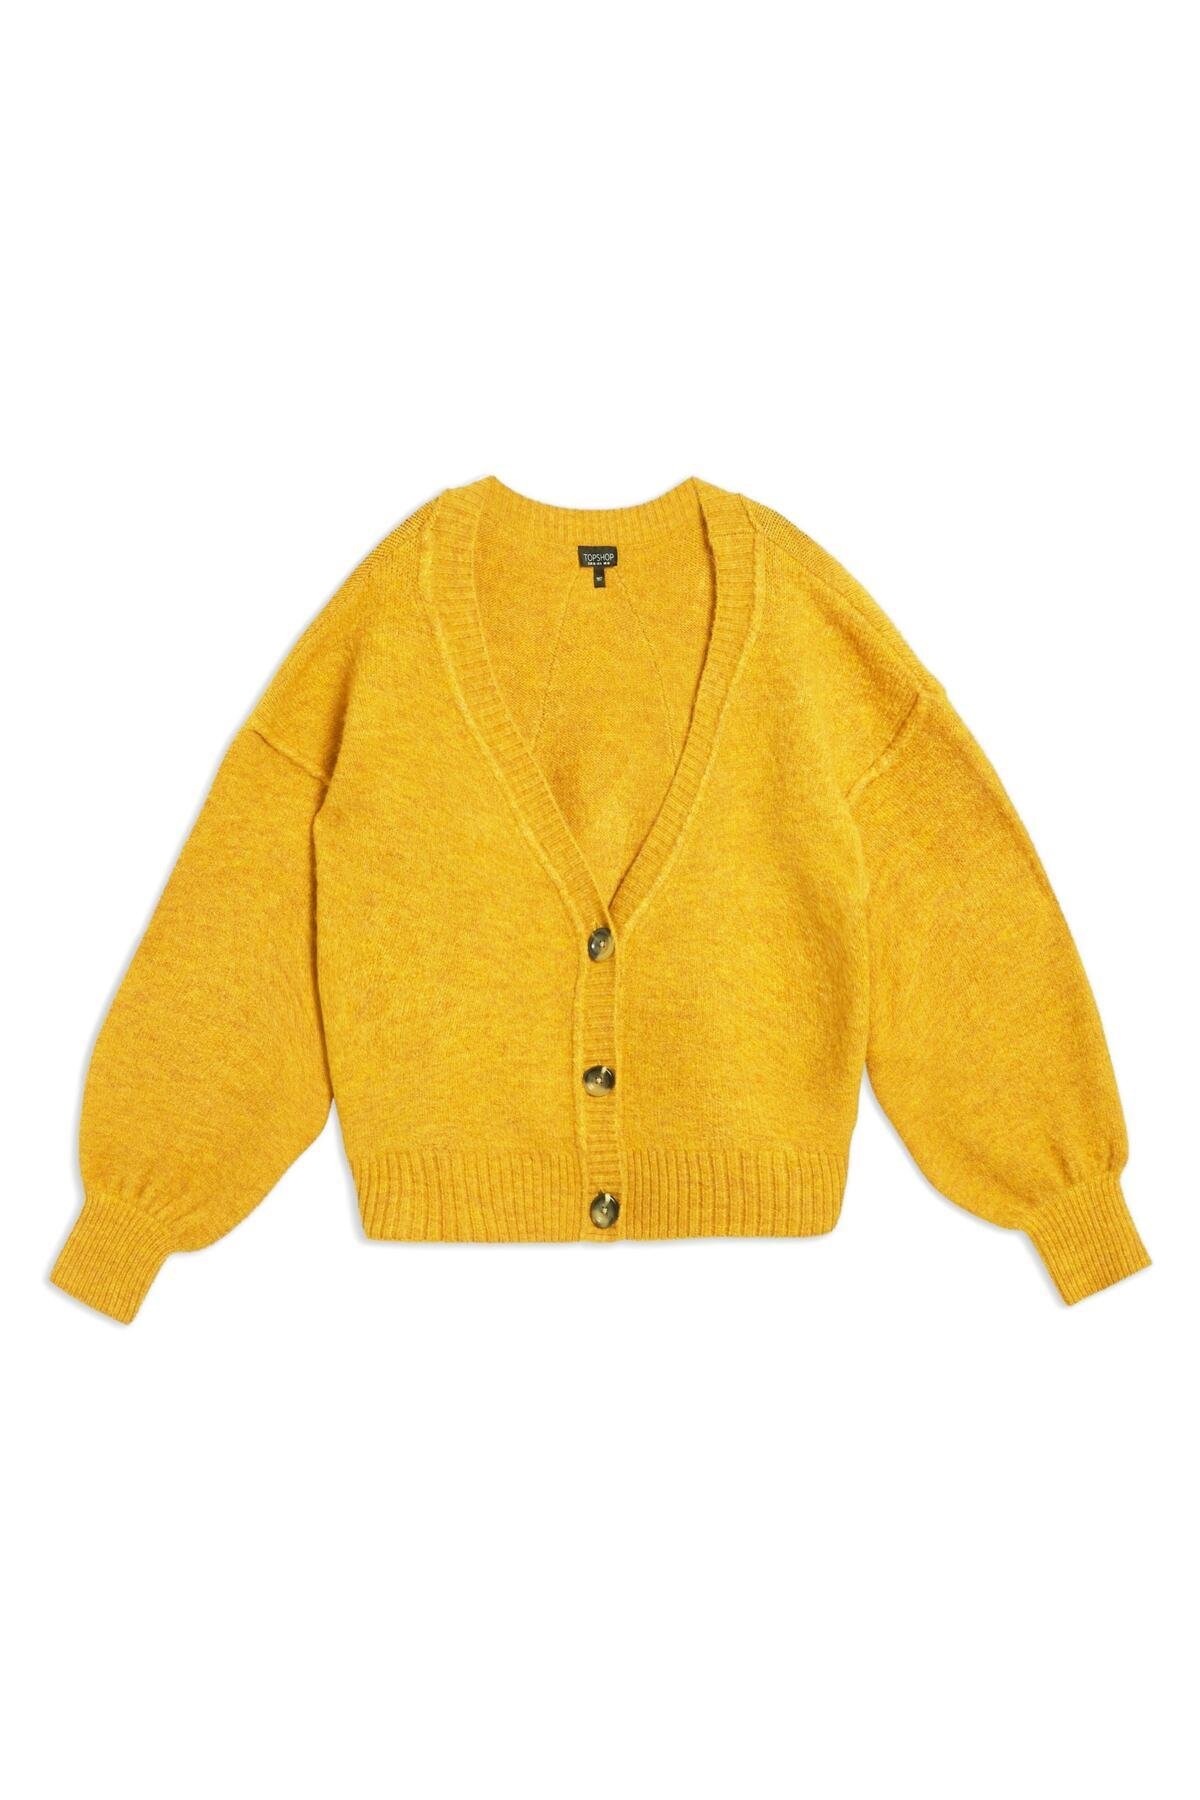 TOPSHOP Horn Button Crop Cardigan in Yellow | Lyst